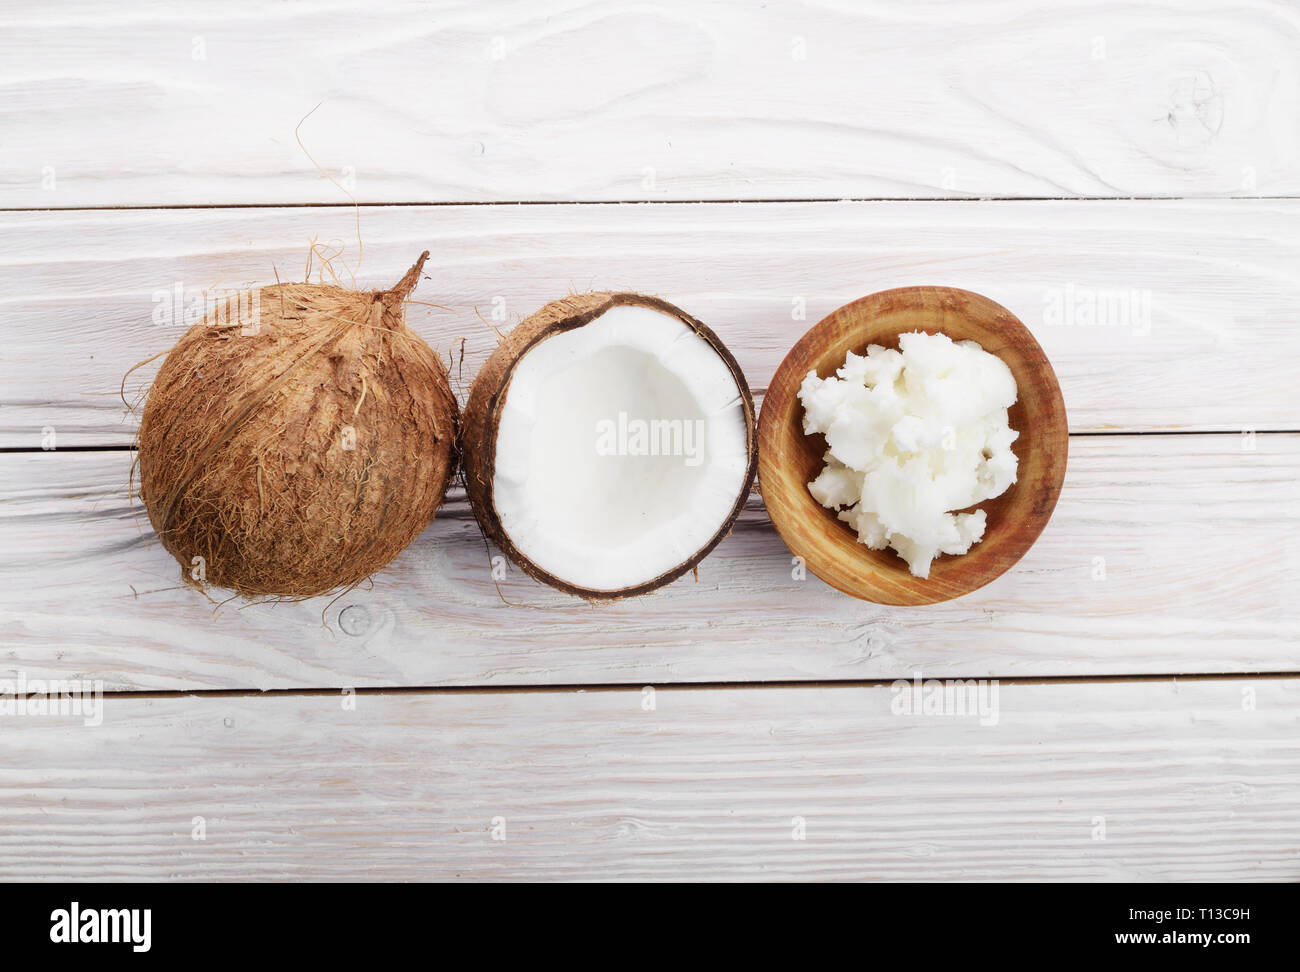 Flat lay background of coconut, coconut shell, hard oil in wooden bowl on white wooden table Stock Photo